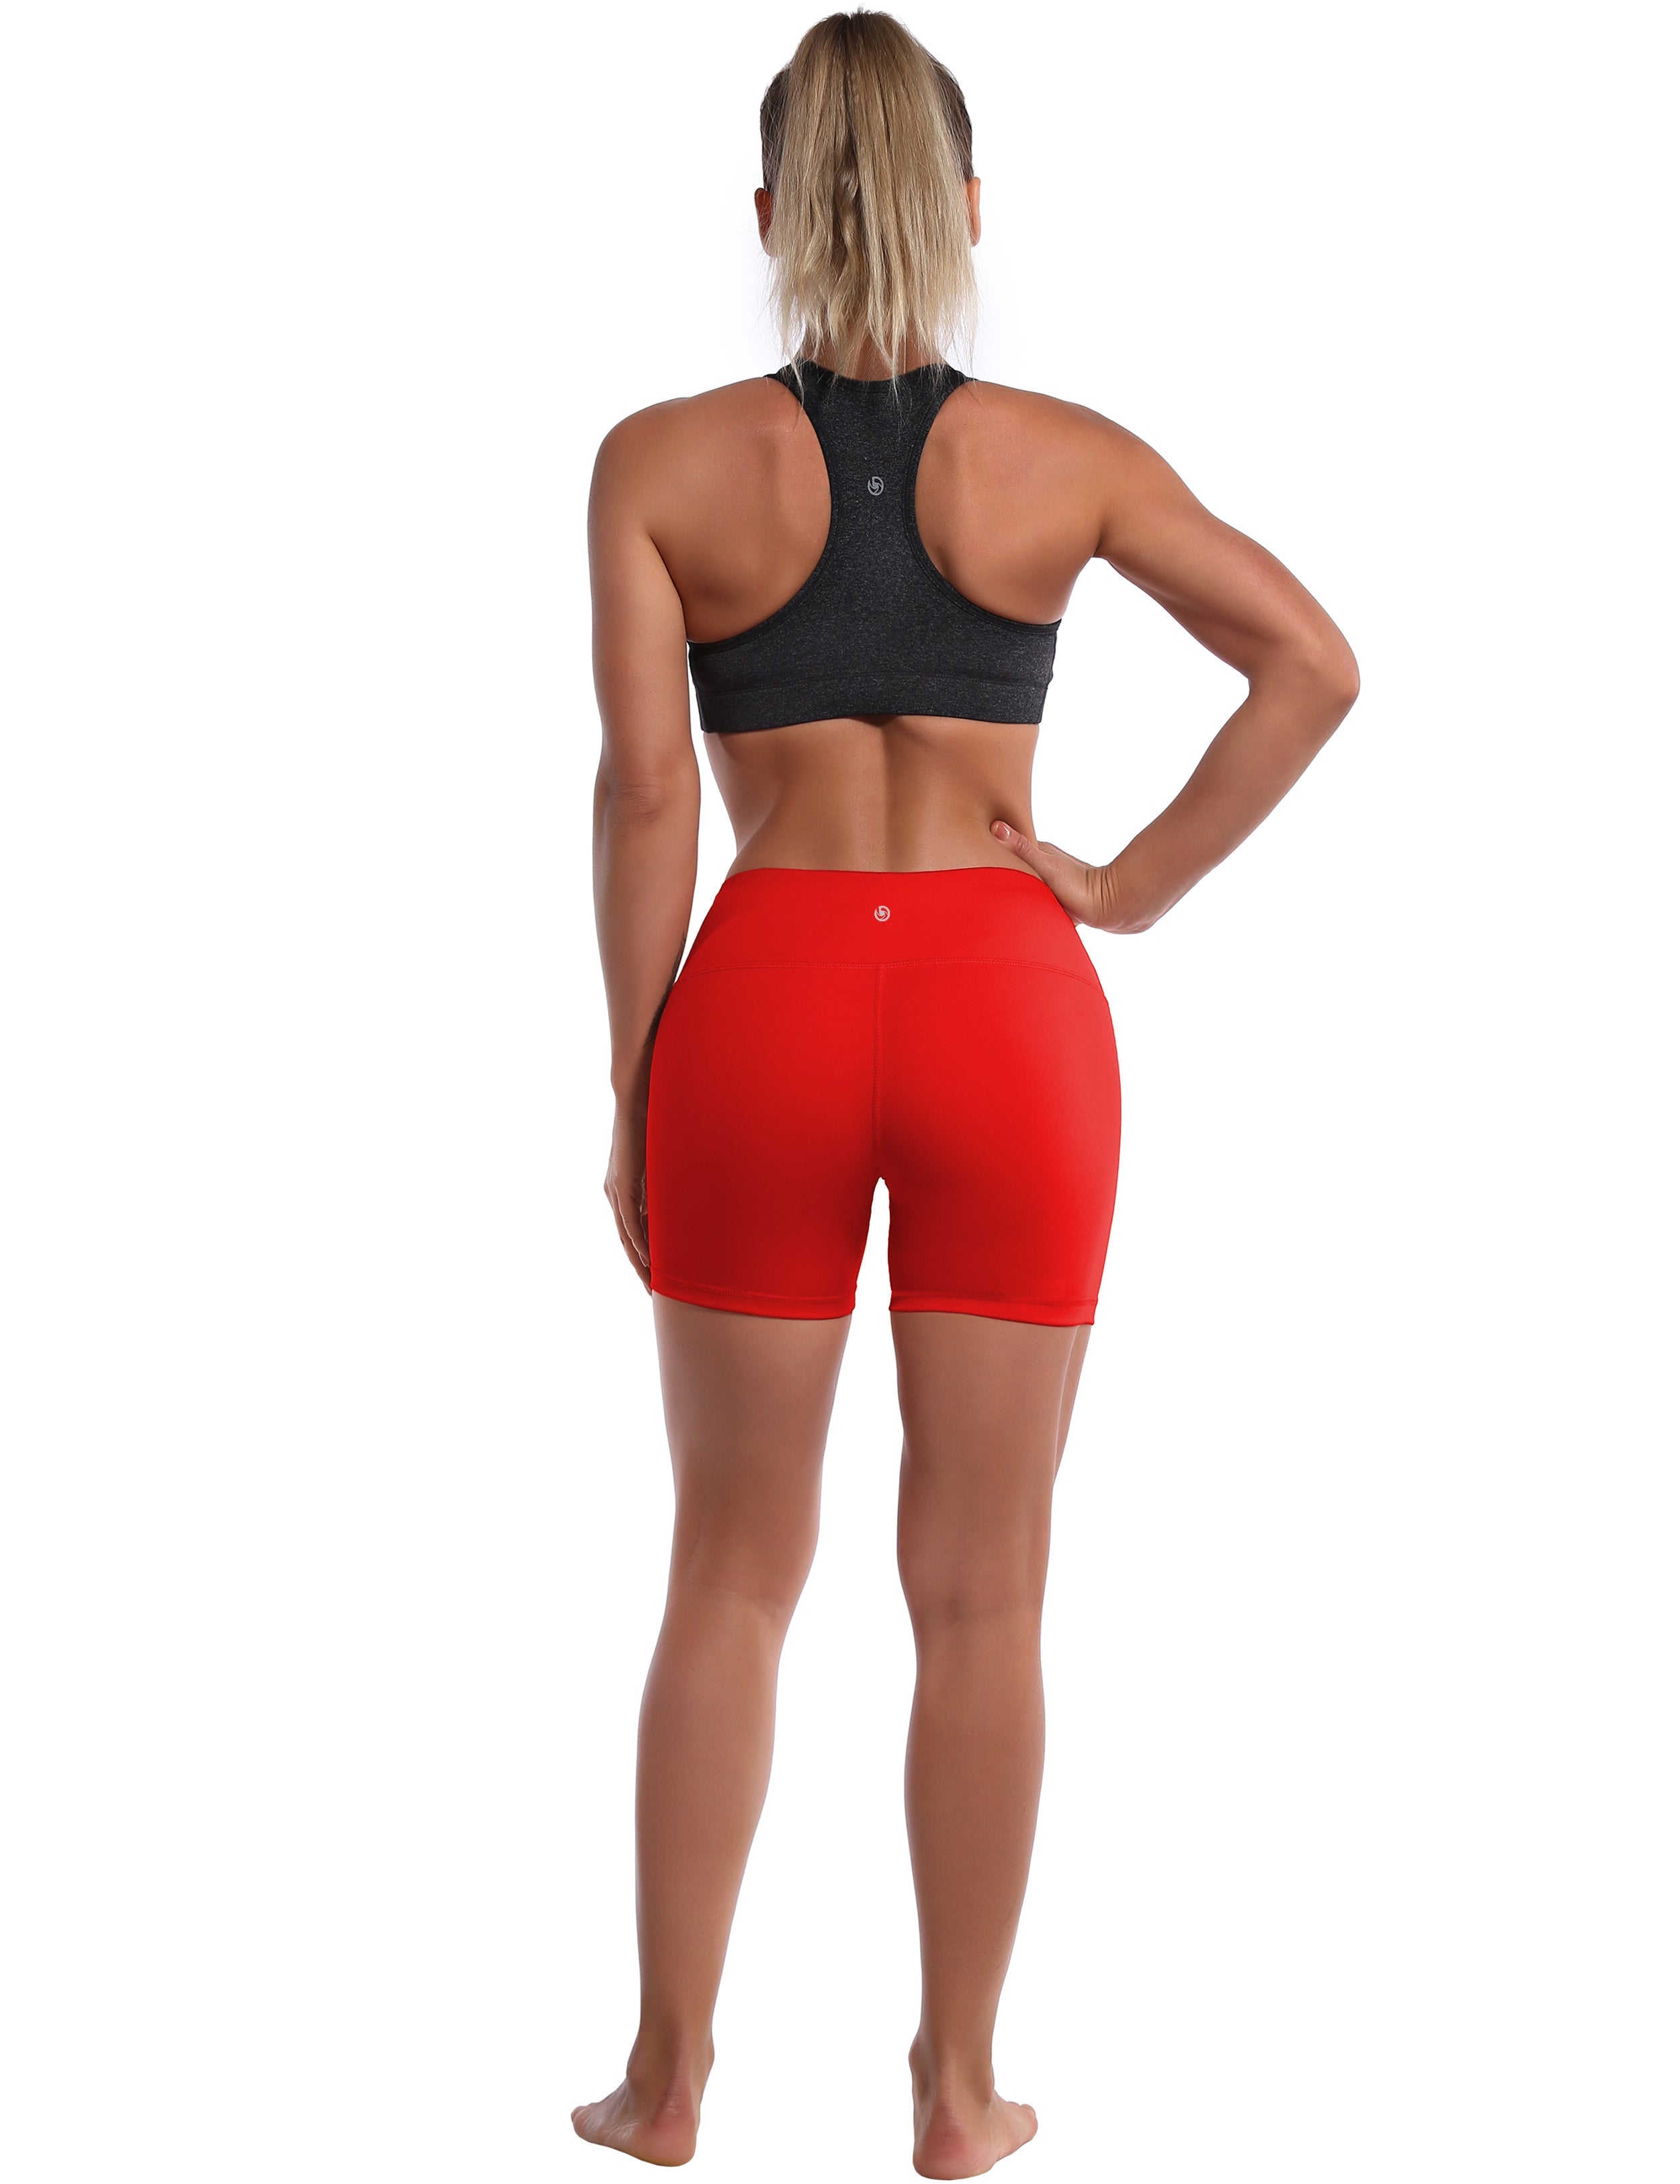 4" Golf Shorts scarlet Sleek, soft, smooth and totally comfortable: our newest style is here. Softest-ever fabric High elasticity High density 4-way stretch Fabric doesn't attract lint easily No see-through Moisture-wicking Machine wash 75% Nylon, 25% Spandex